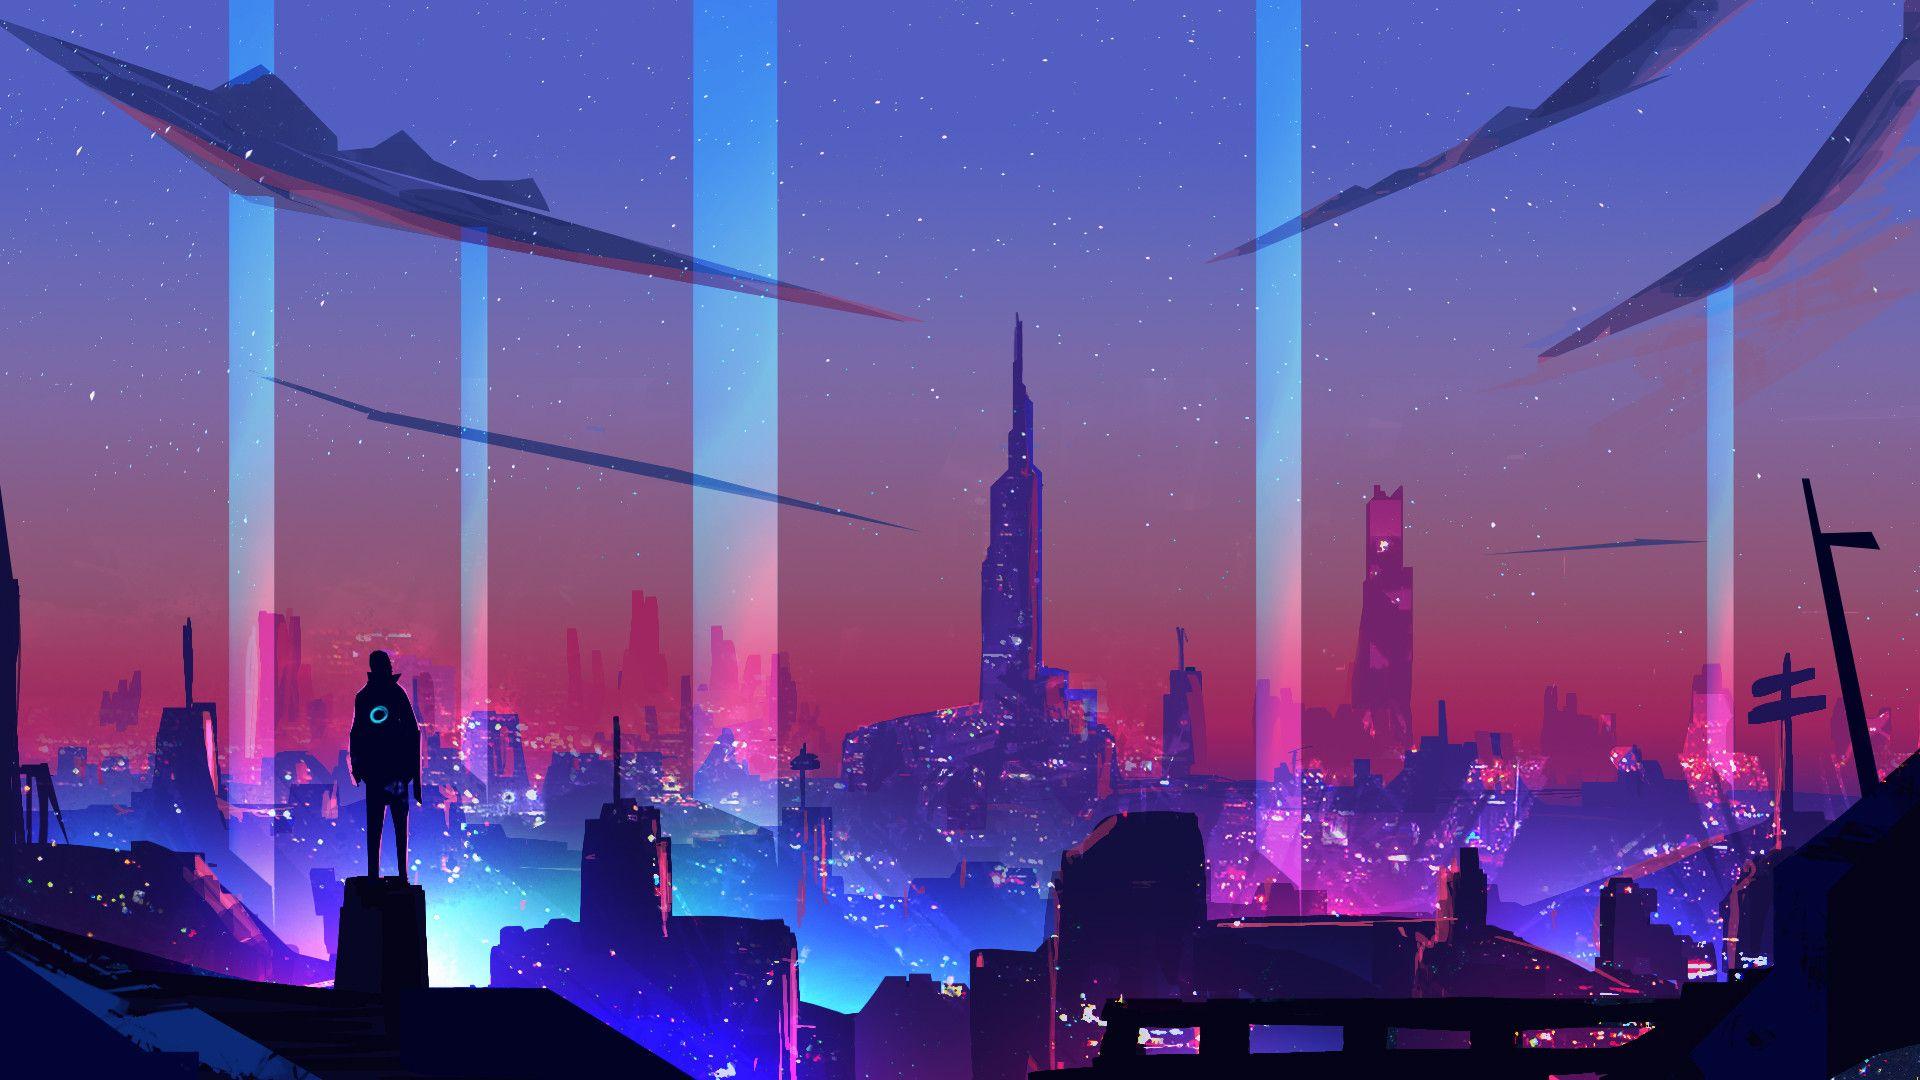 Neon Night City Wallpapers - Top Free Neon Night City Backgrounds